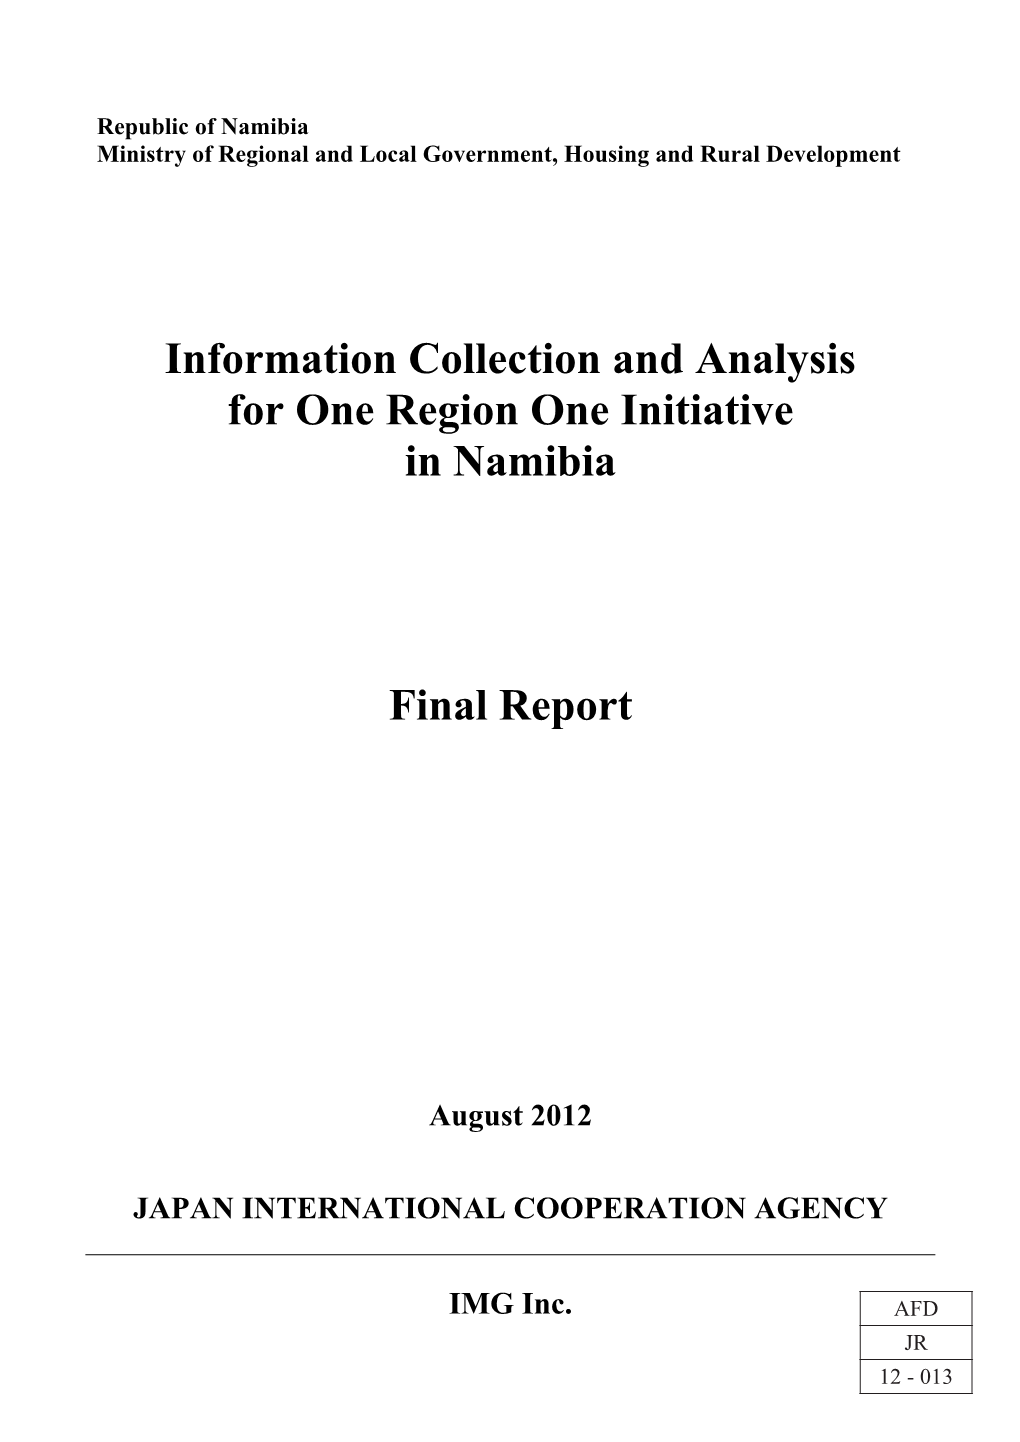 Information Collection and Analysis for One Region One Initiative In